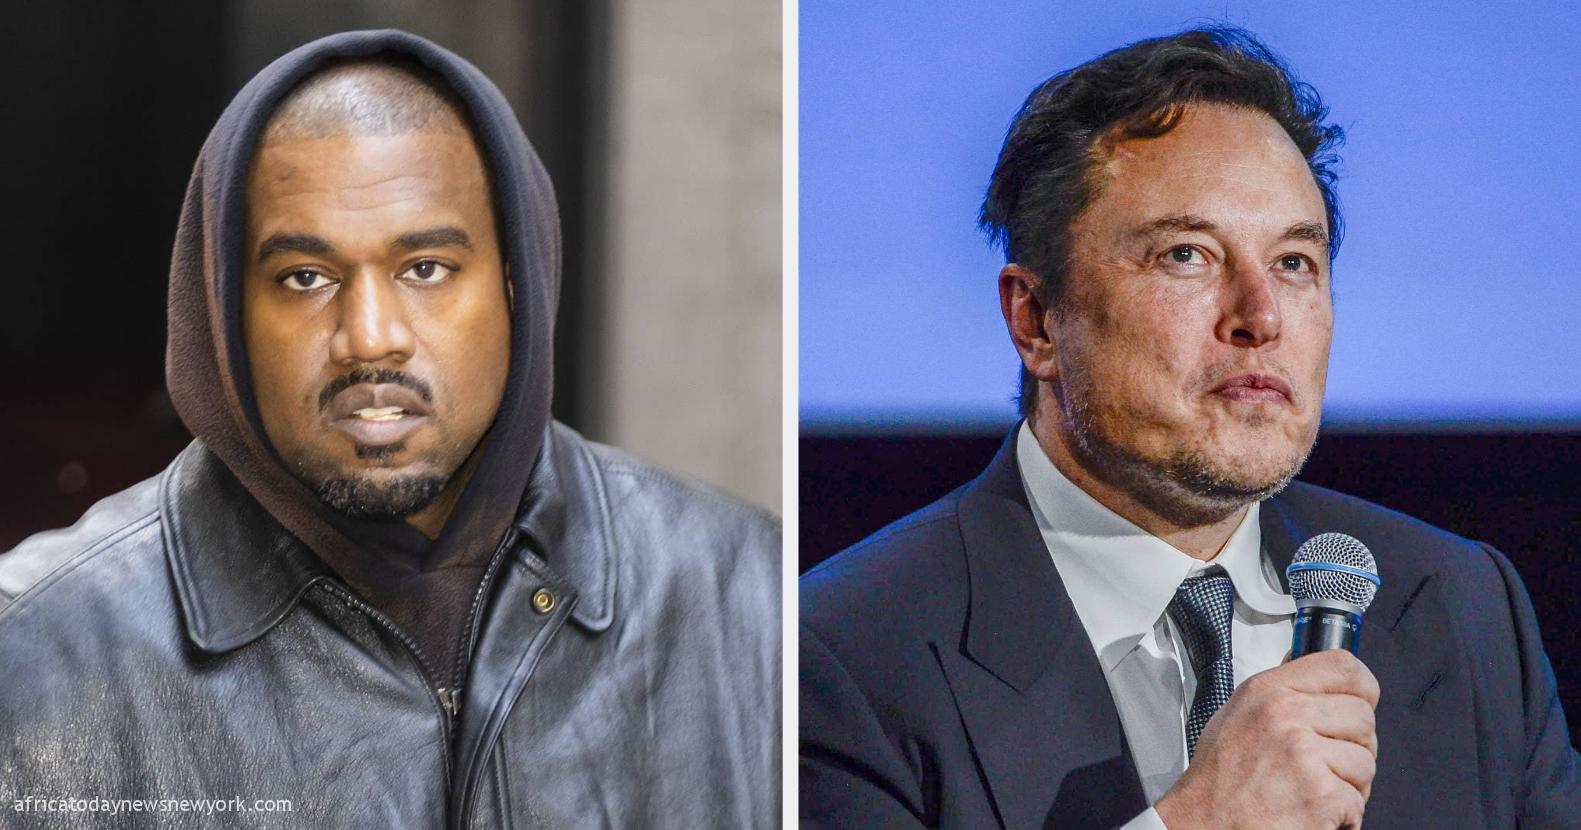 Real Reason I Suspended Kanye’s Twitter Account – Elon Musk